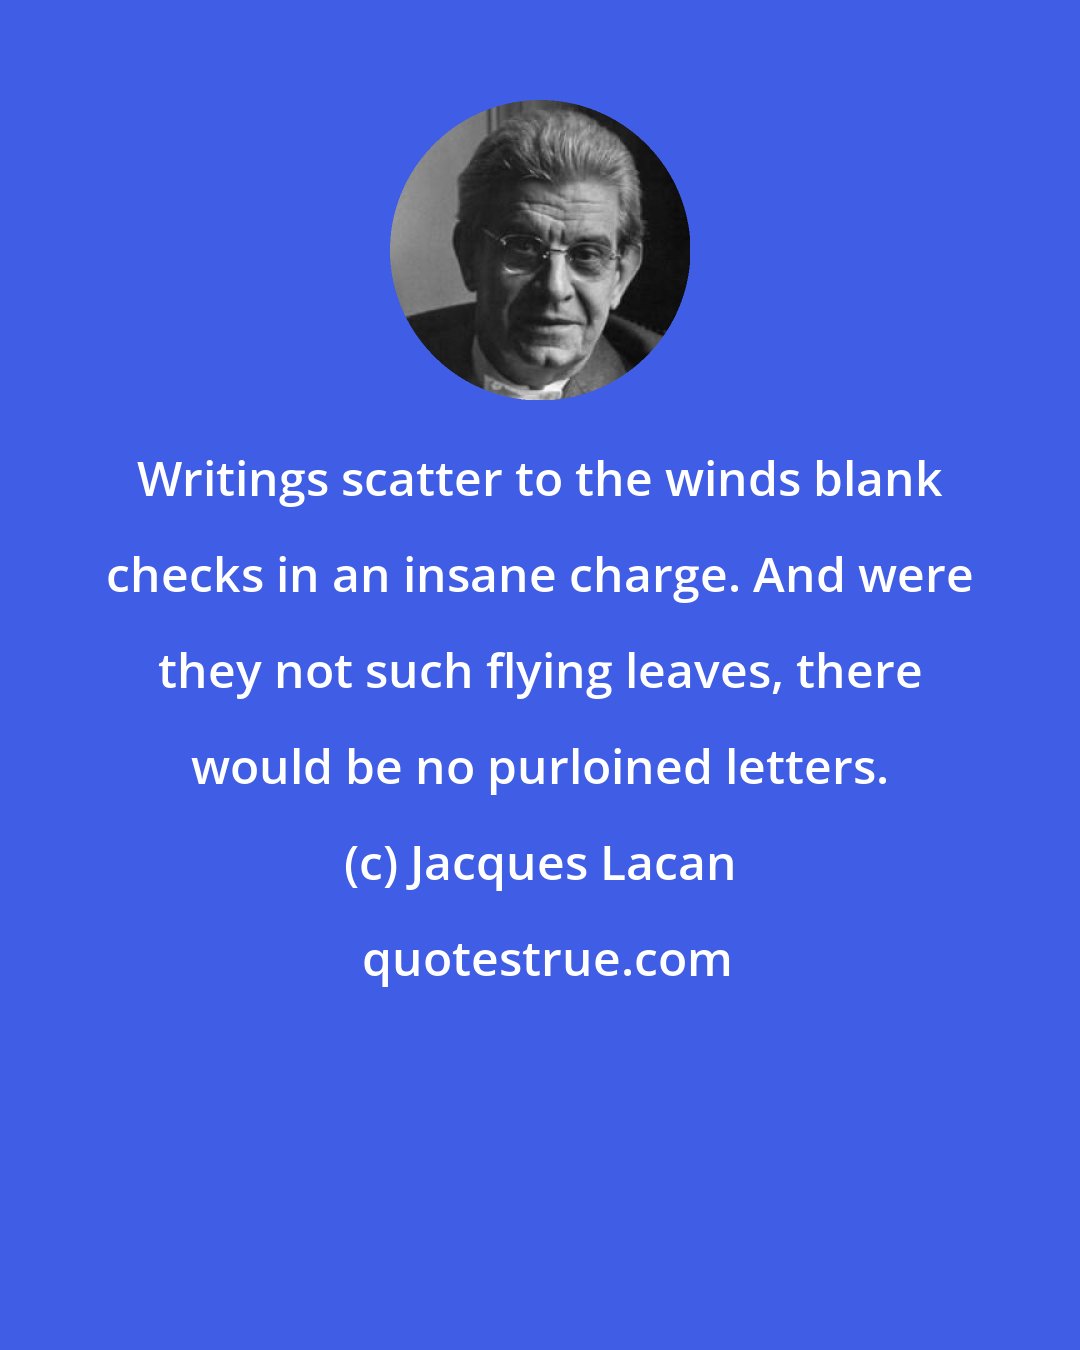 Jacques Lacan: Writings scatter to the winds blank checks in an insane charge. And were they not such flying leaves, there would be no purloined letters.